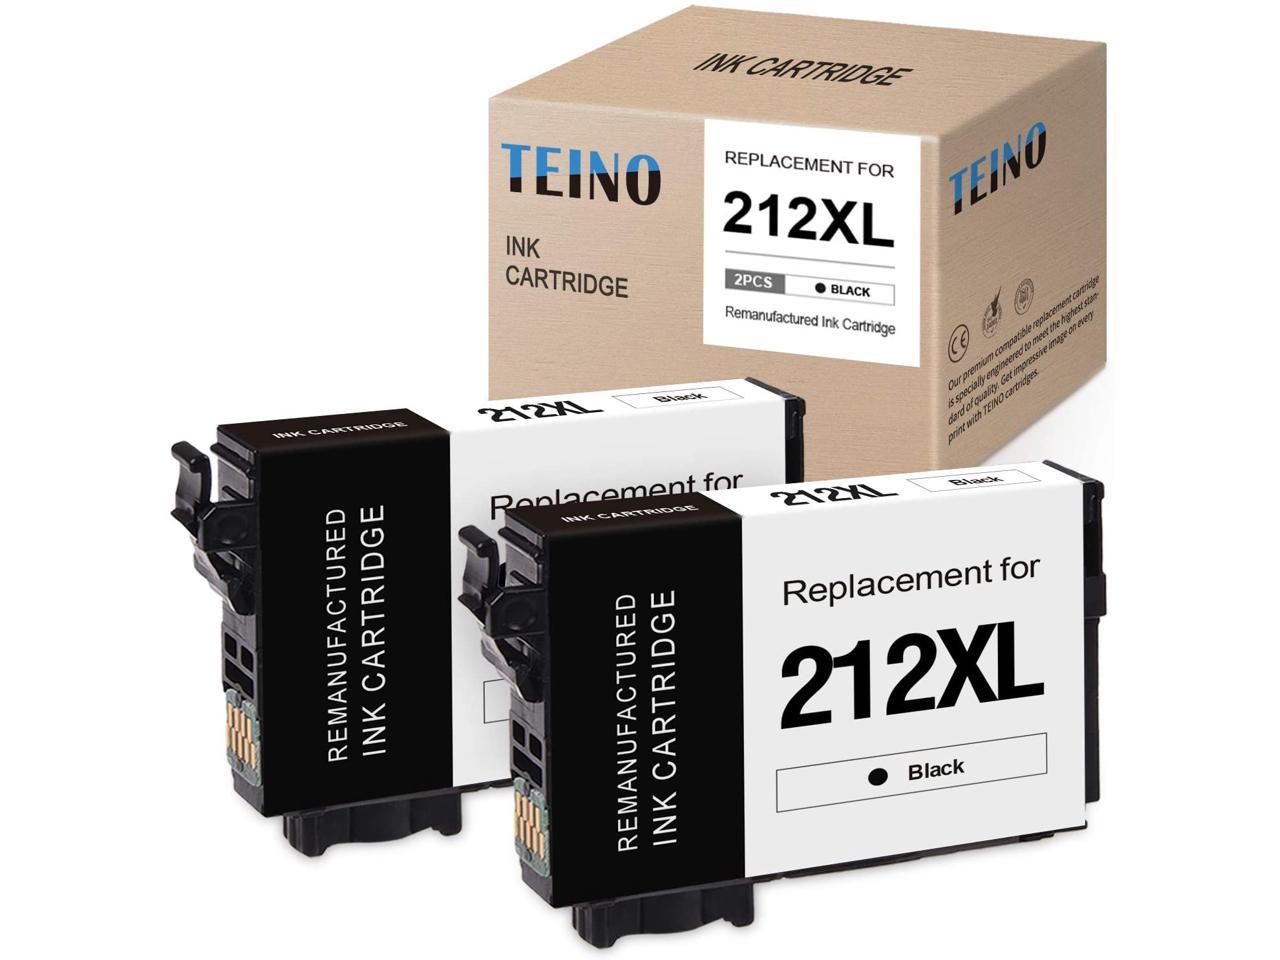 TEINO Ink Cartridge Replacement for Epson 212 212XL T212XL use with